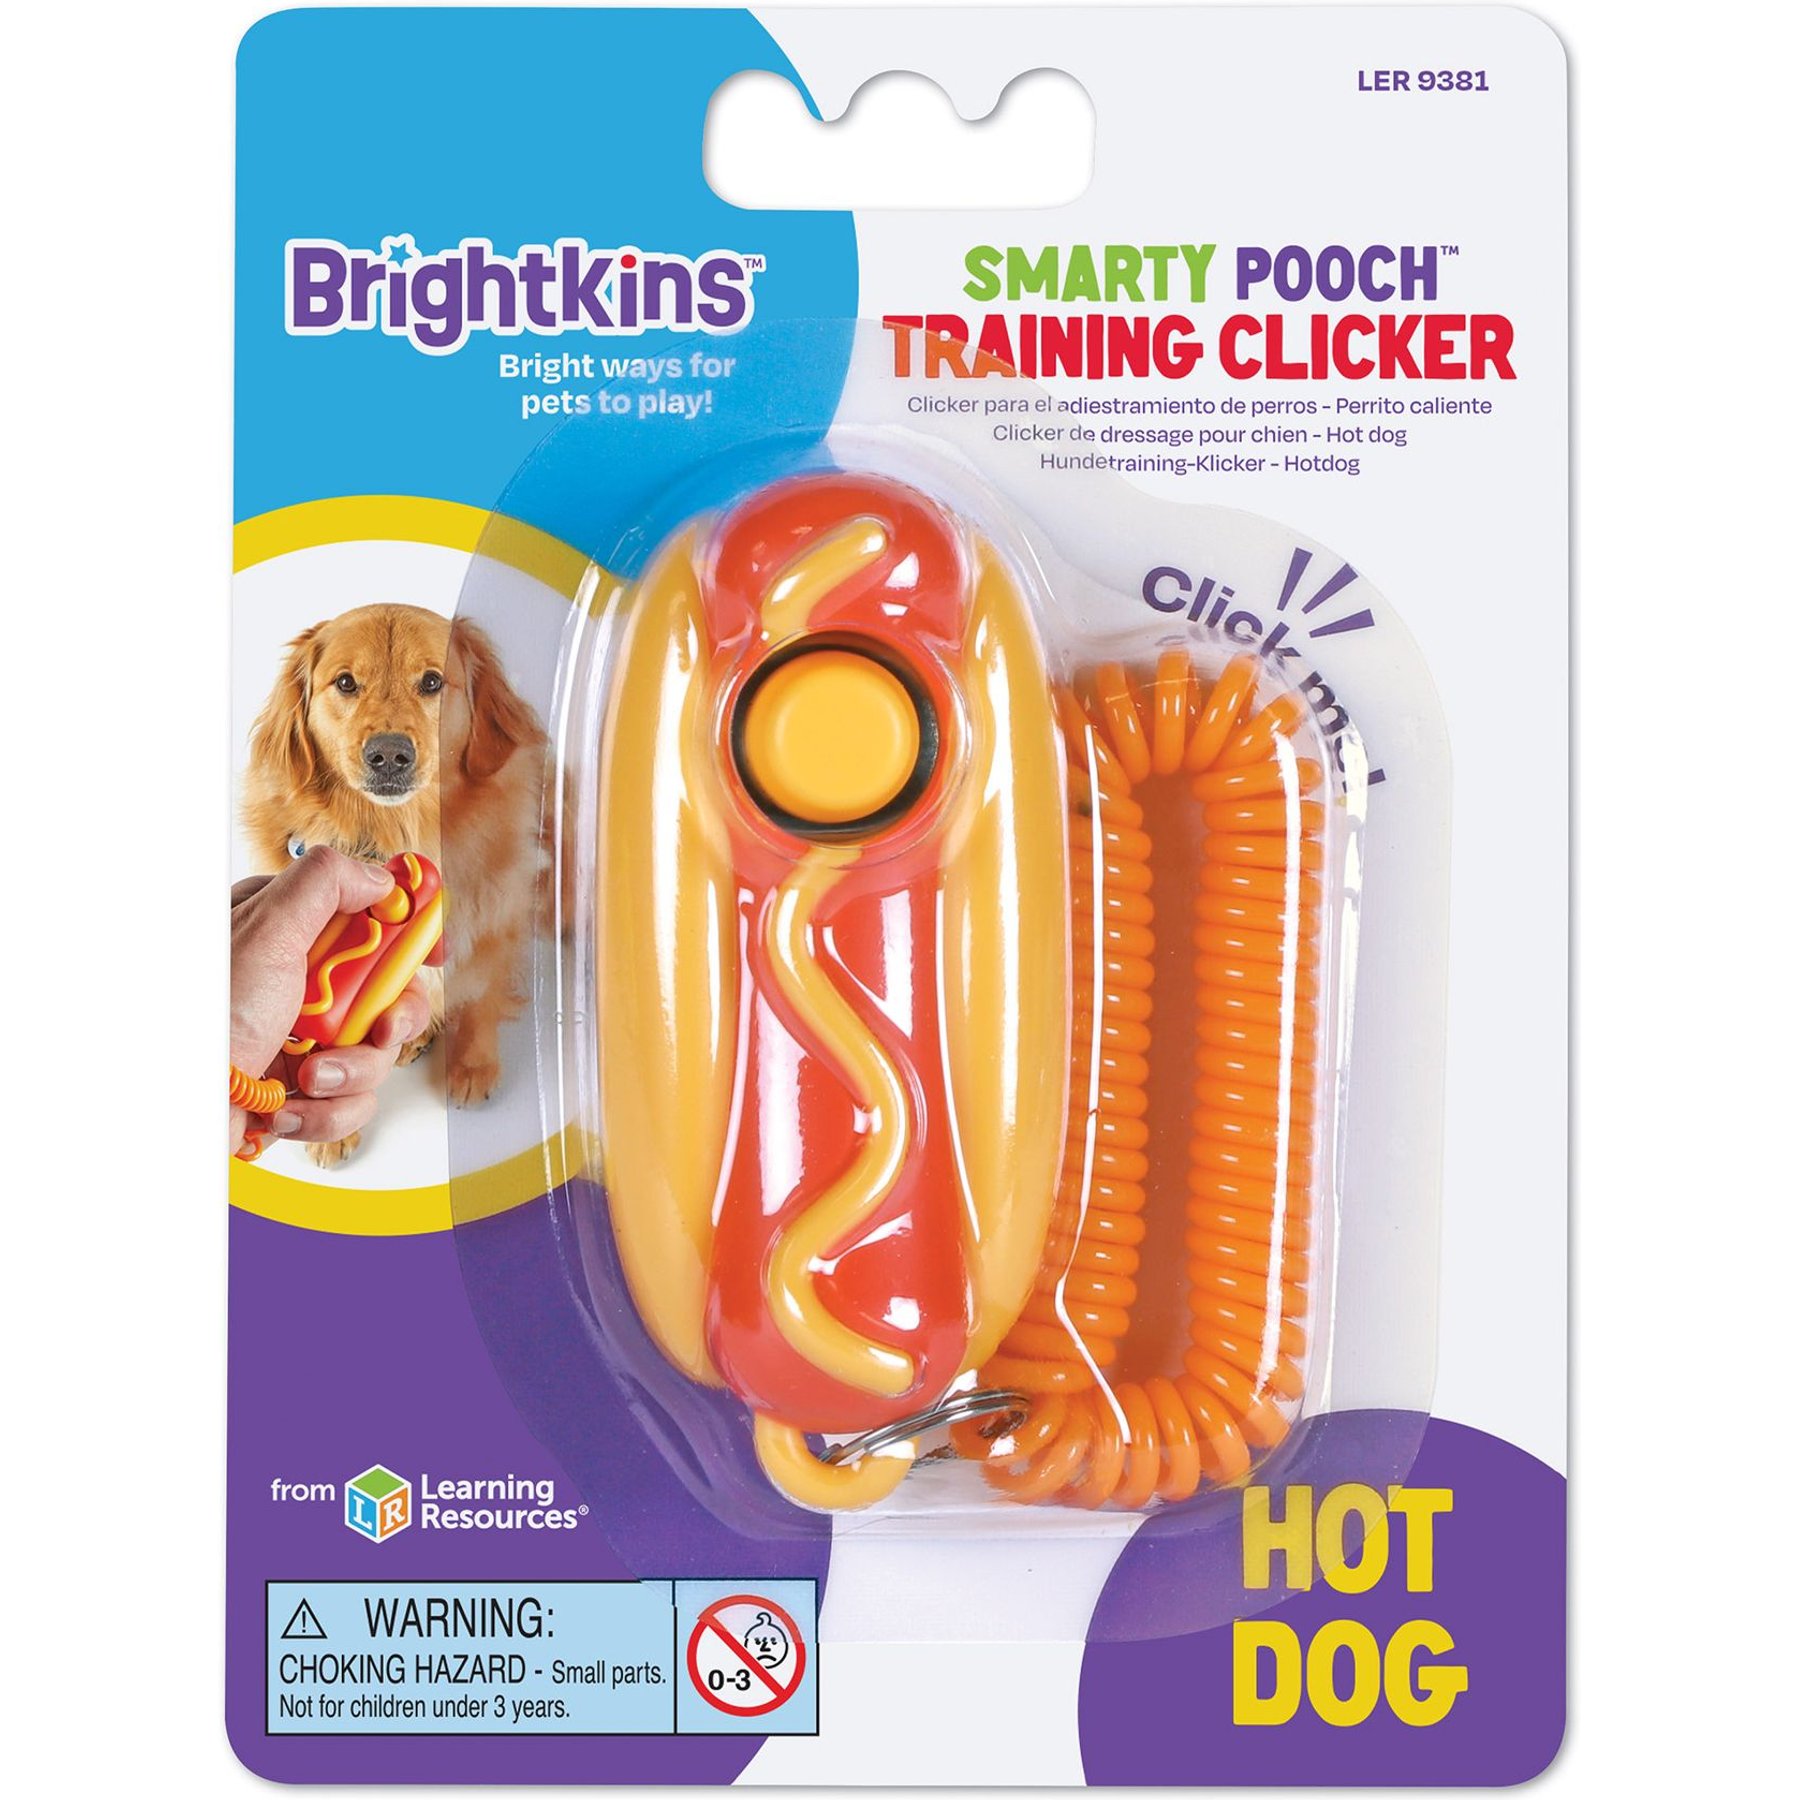 Learning Resources Enters the Pet Industry with Brightkins Pet